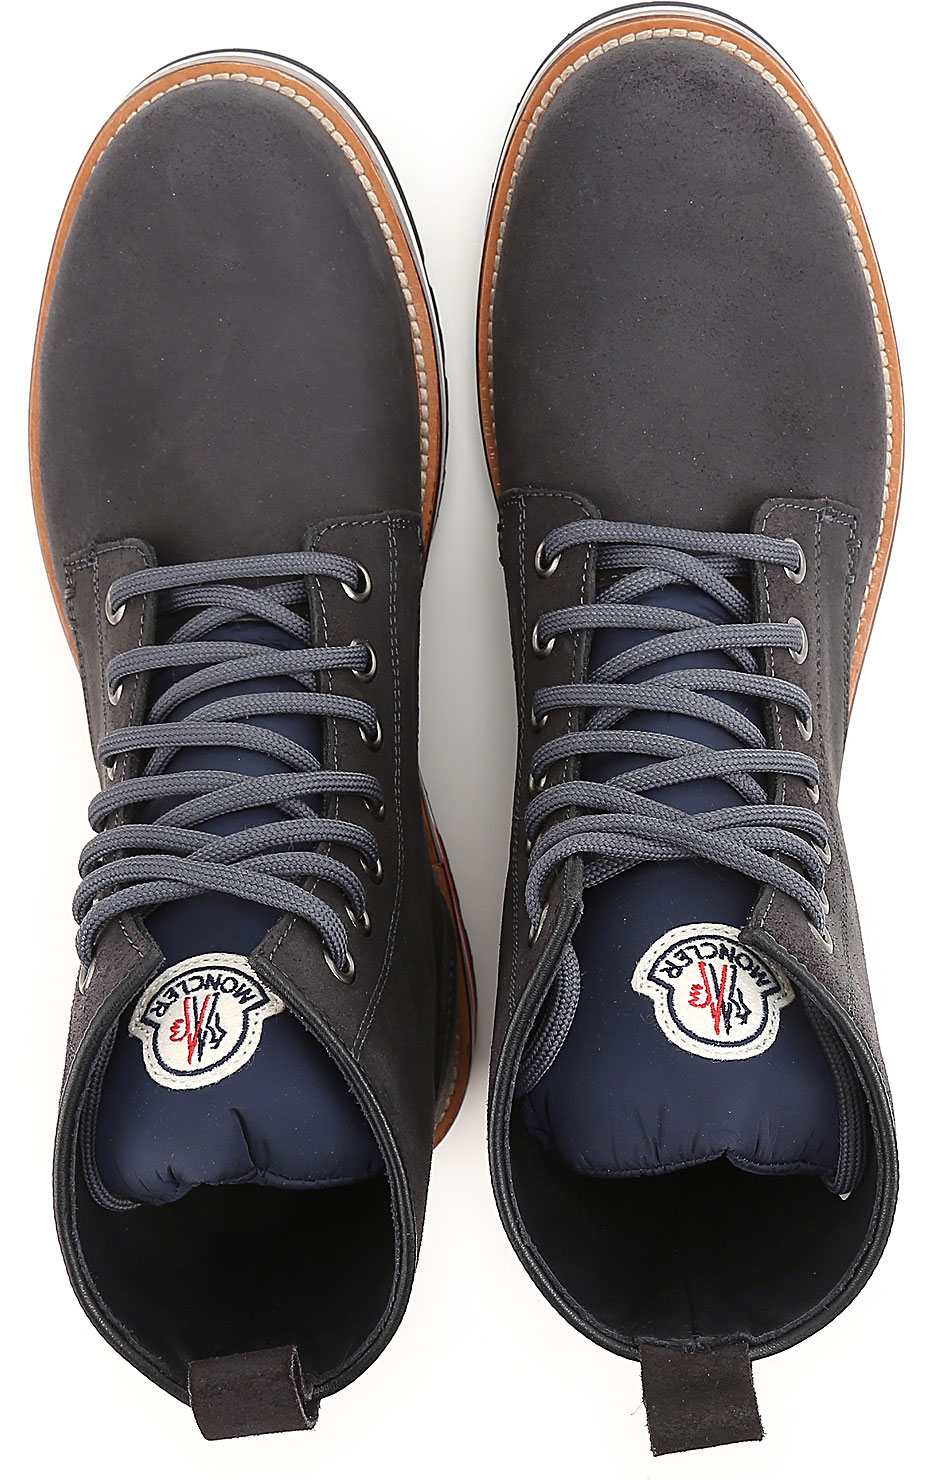 Mens Shoes Moncler, Style code 101620001721926